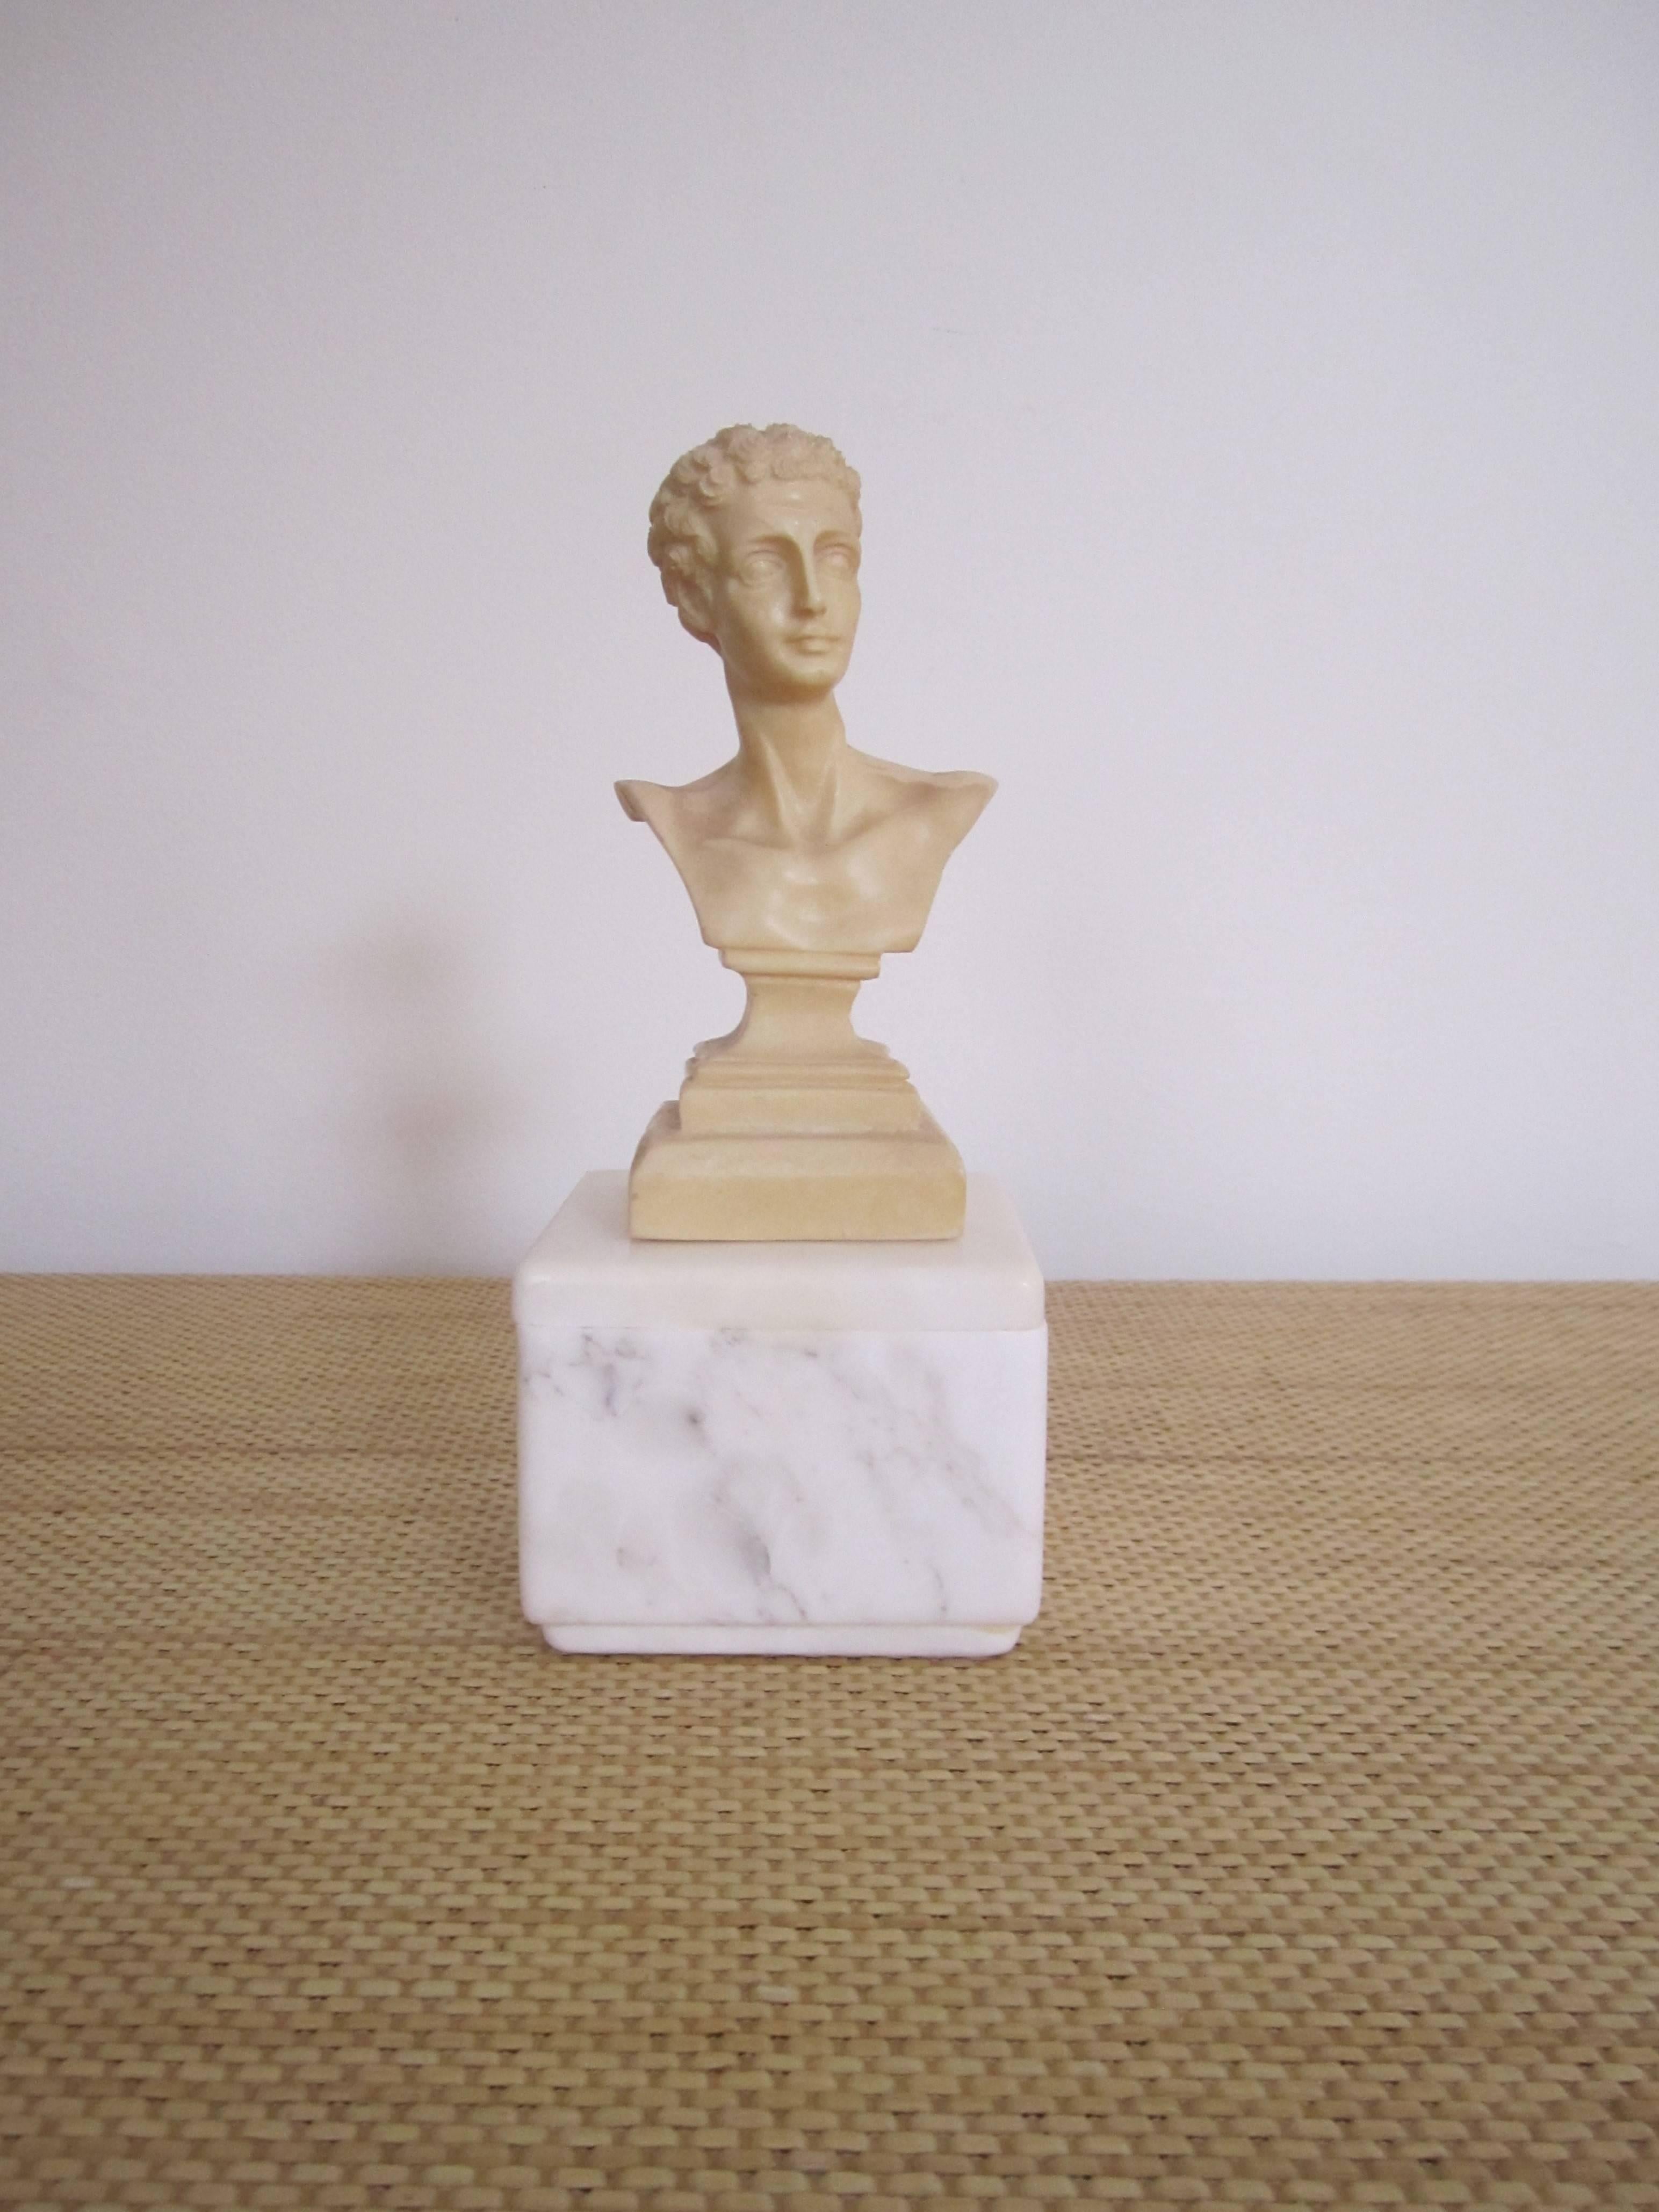 Carved Midcentury Italian Classical Roman Sculpture Bust